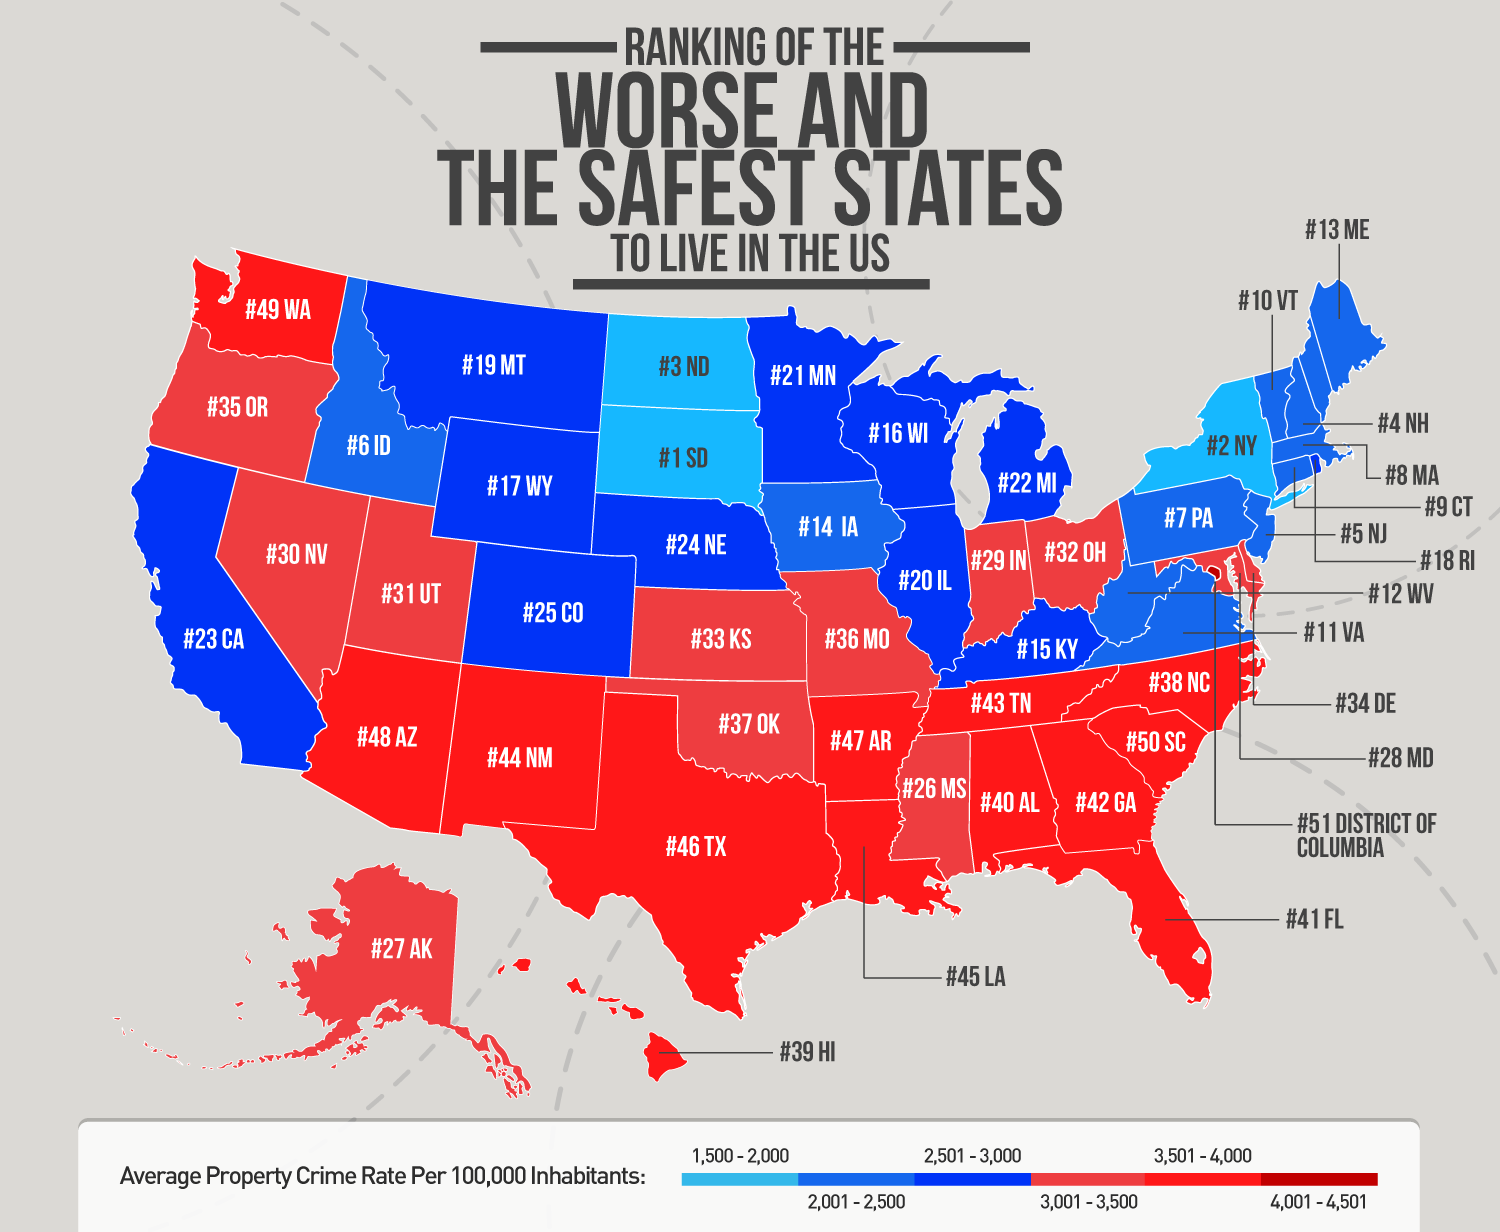 Ranking of the worse and the safest states to live in the U.S. - Vivid Maps